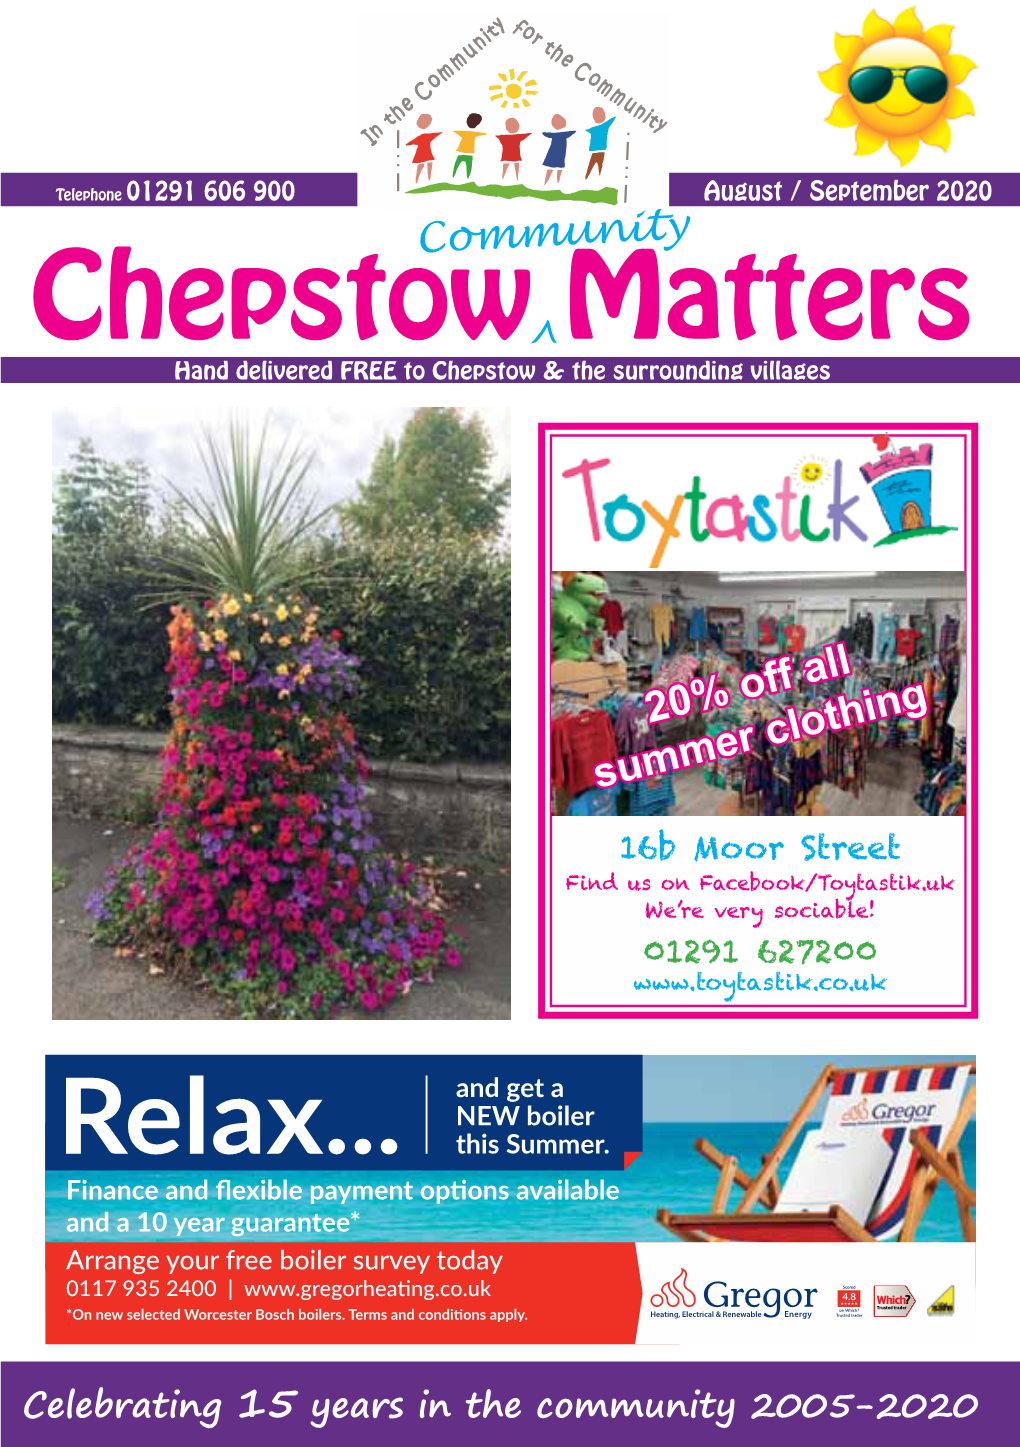 Chepstow Matters Editor: Jaci Crocombe Now After a Prolonged Period of Inactivity for Some